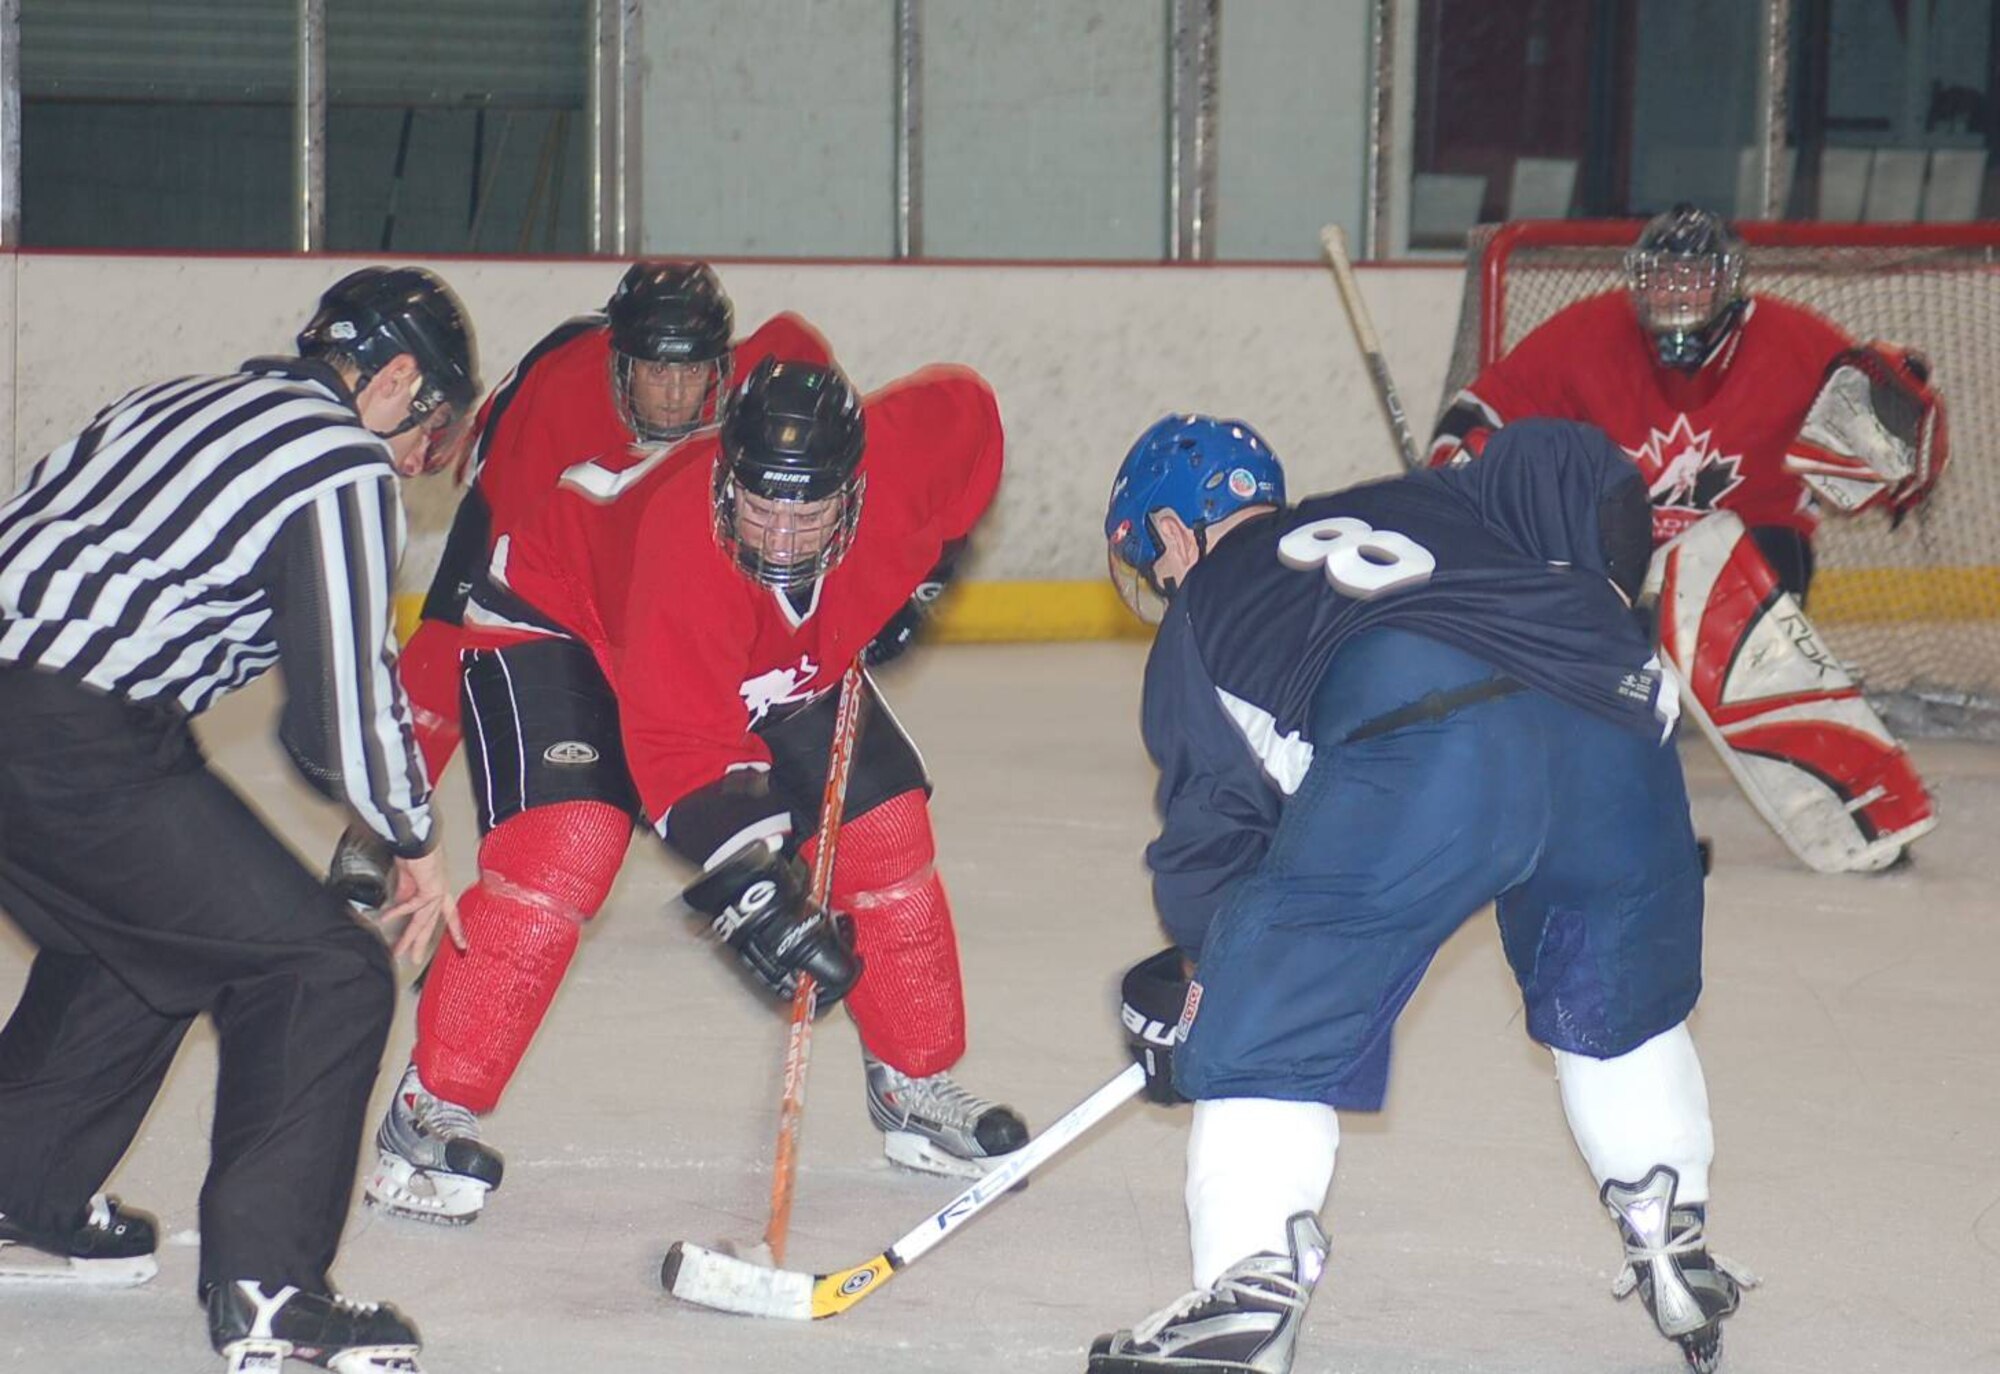 The Canadian and American Components first went head-to-head in May in Canada’s most popular sport, ice hockey. The American team, although behind for the majority of the game, made a comeback to win the CAN-AM Cup.